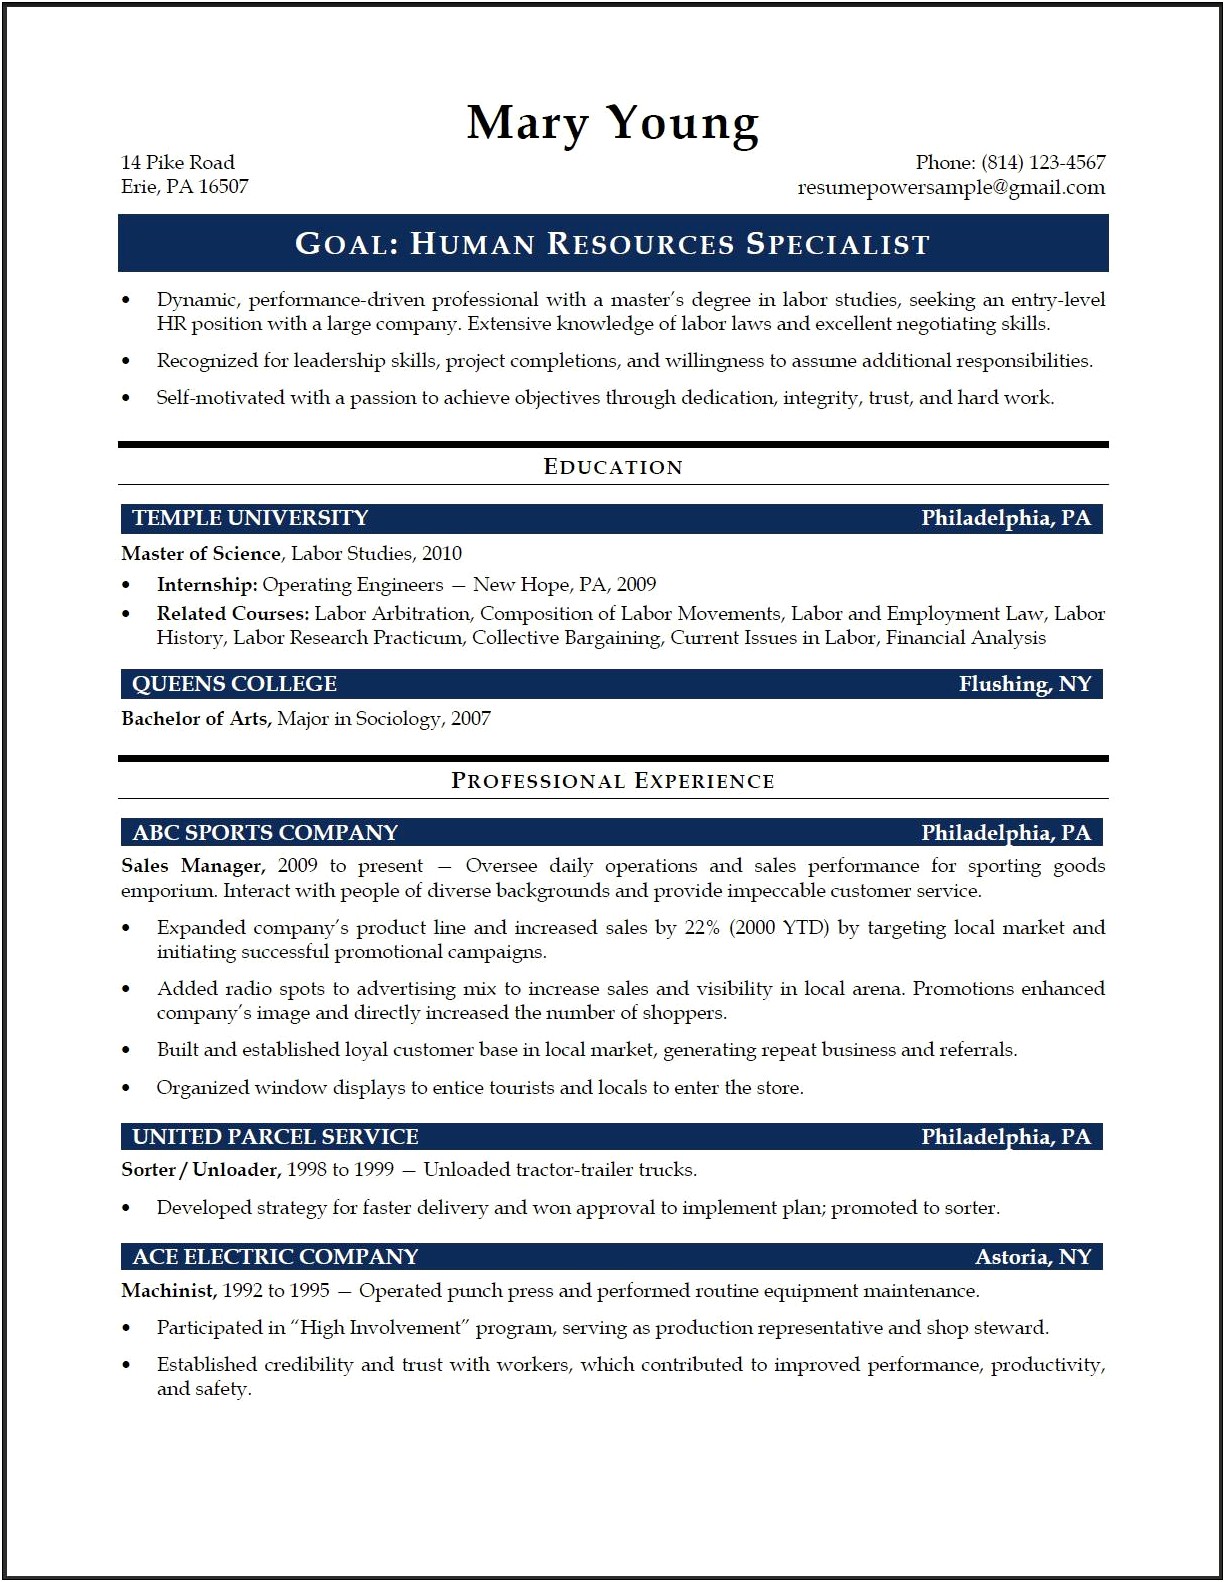 Human Resources Objective Resume Sample